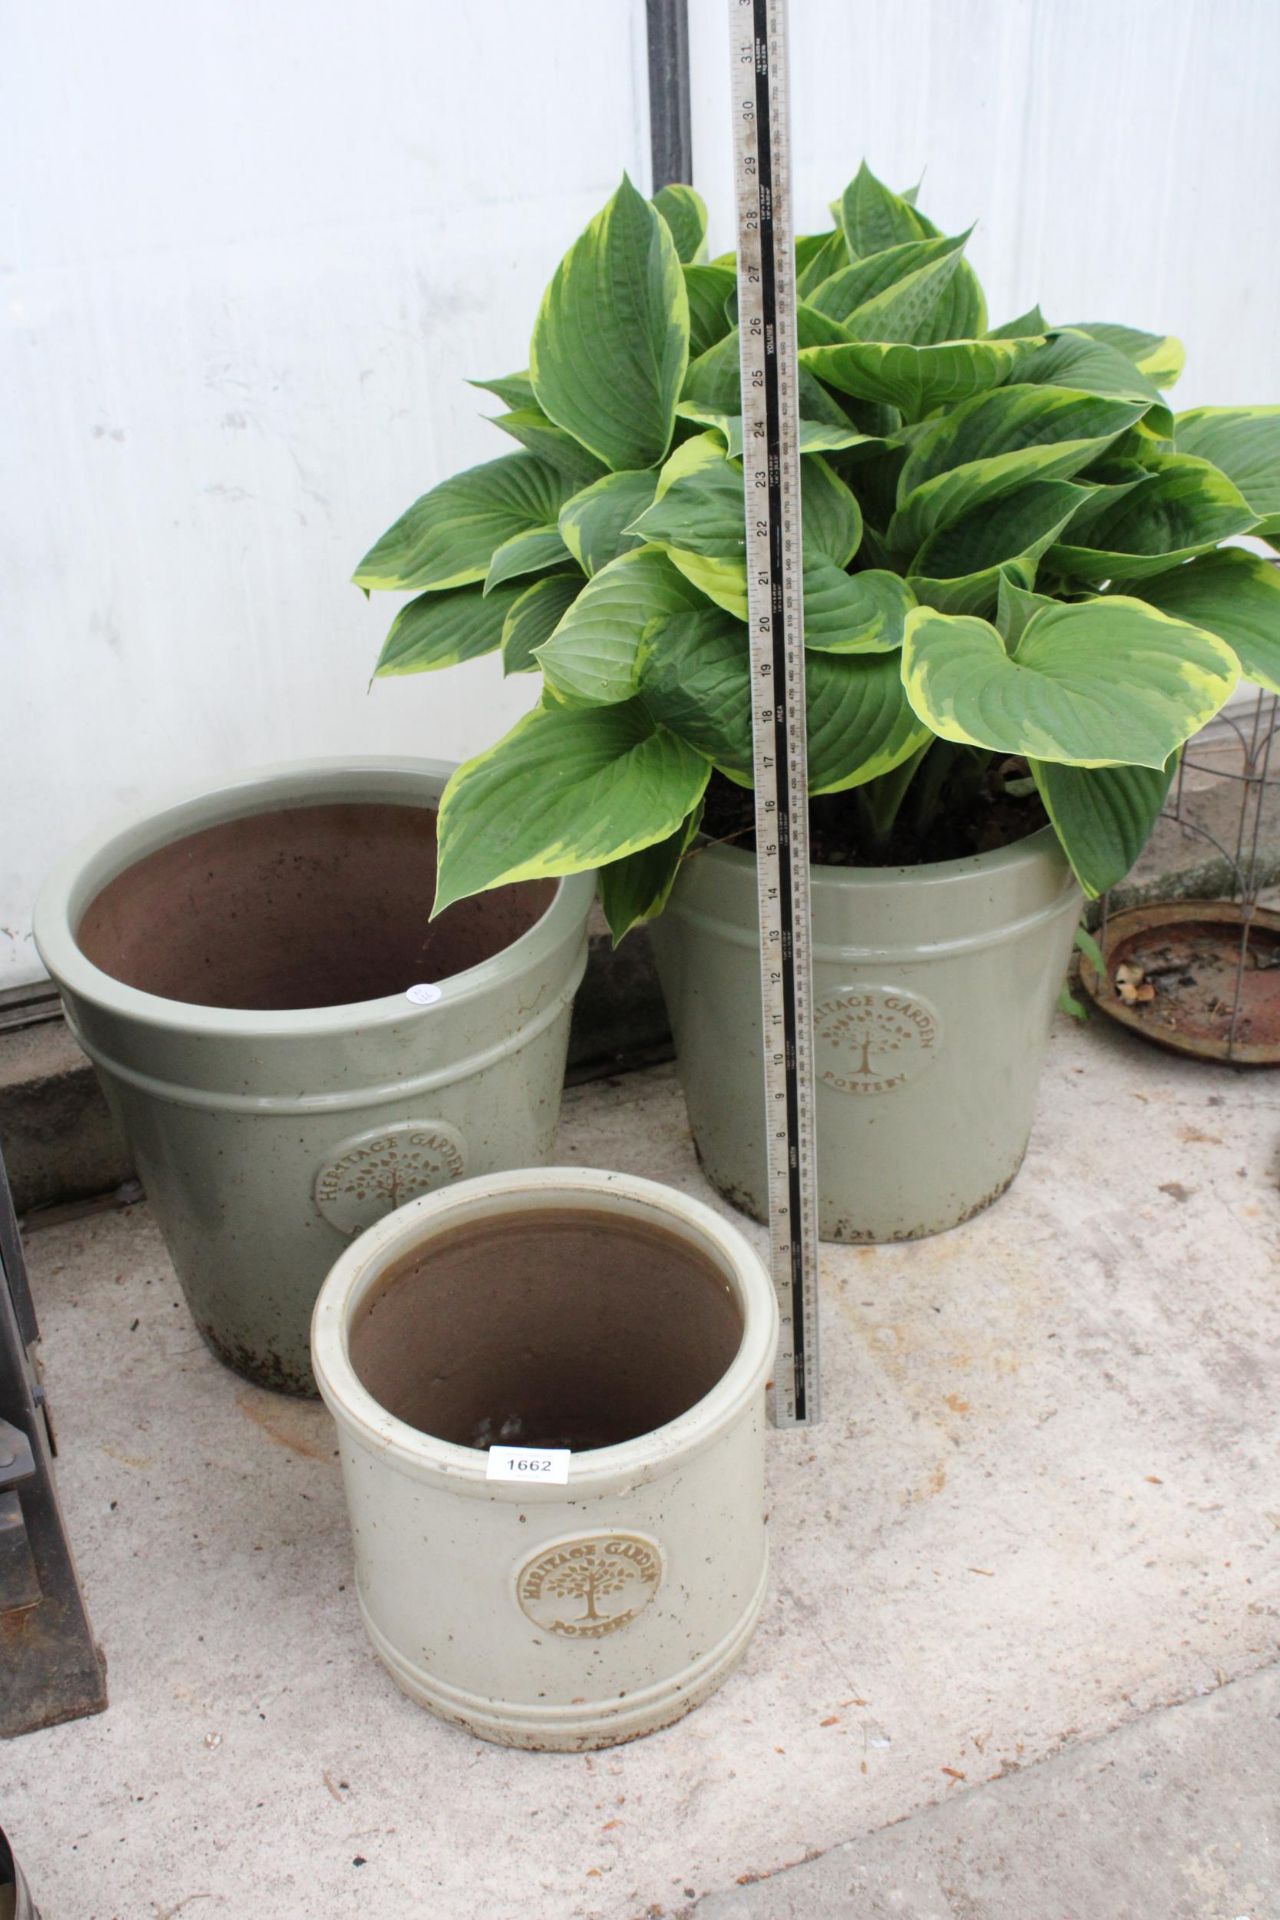 A SET OF THREE GLAZED HERITAGE GARDEN POTTERY TUBS ONE CONTAINING HOSTERS - Image 3 of 3